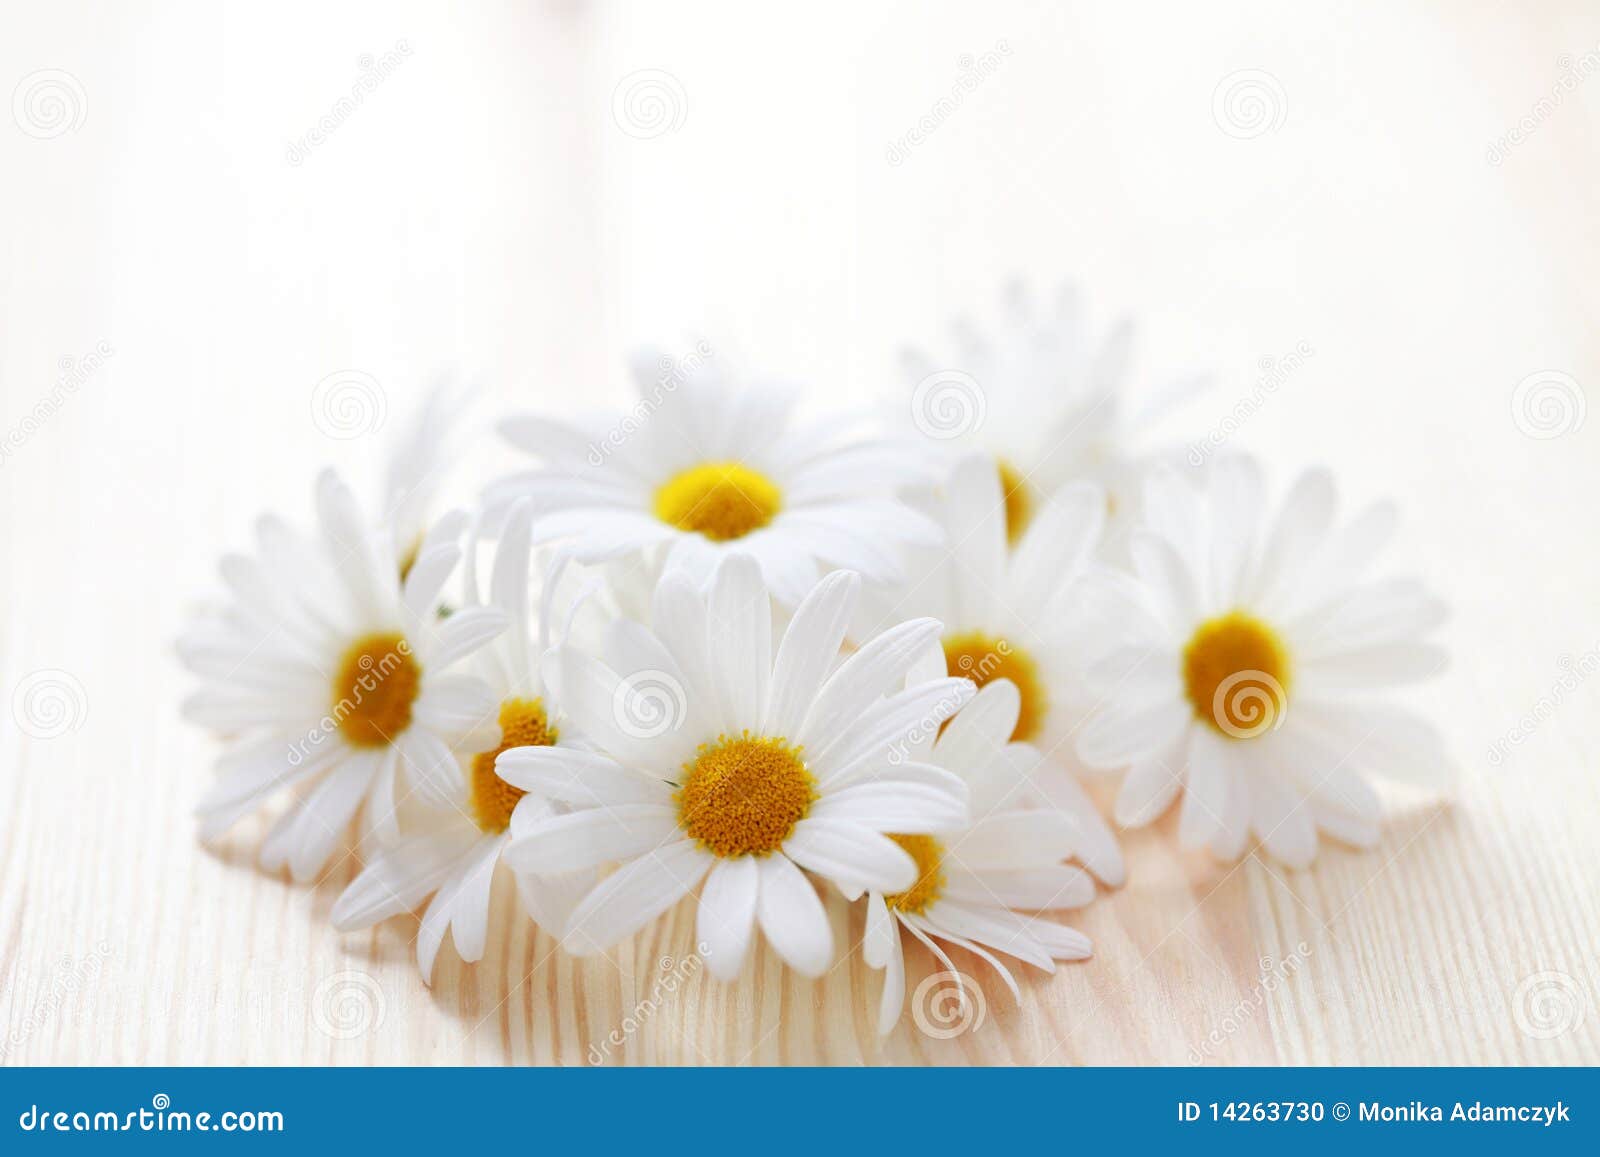 camomille flowers